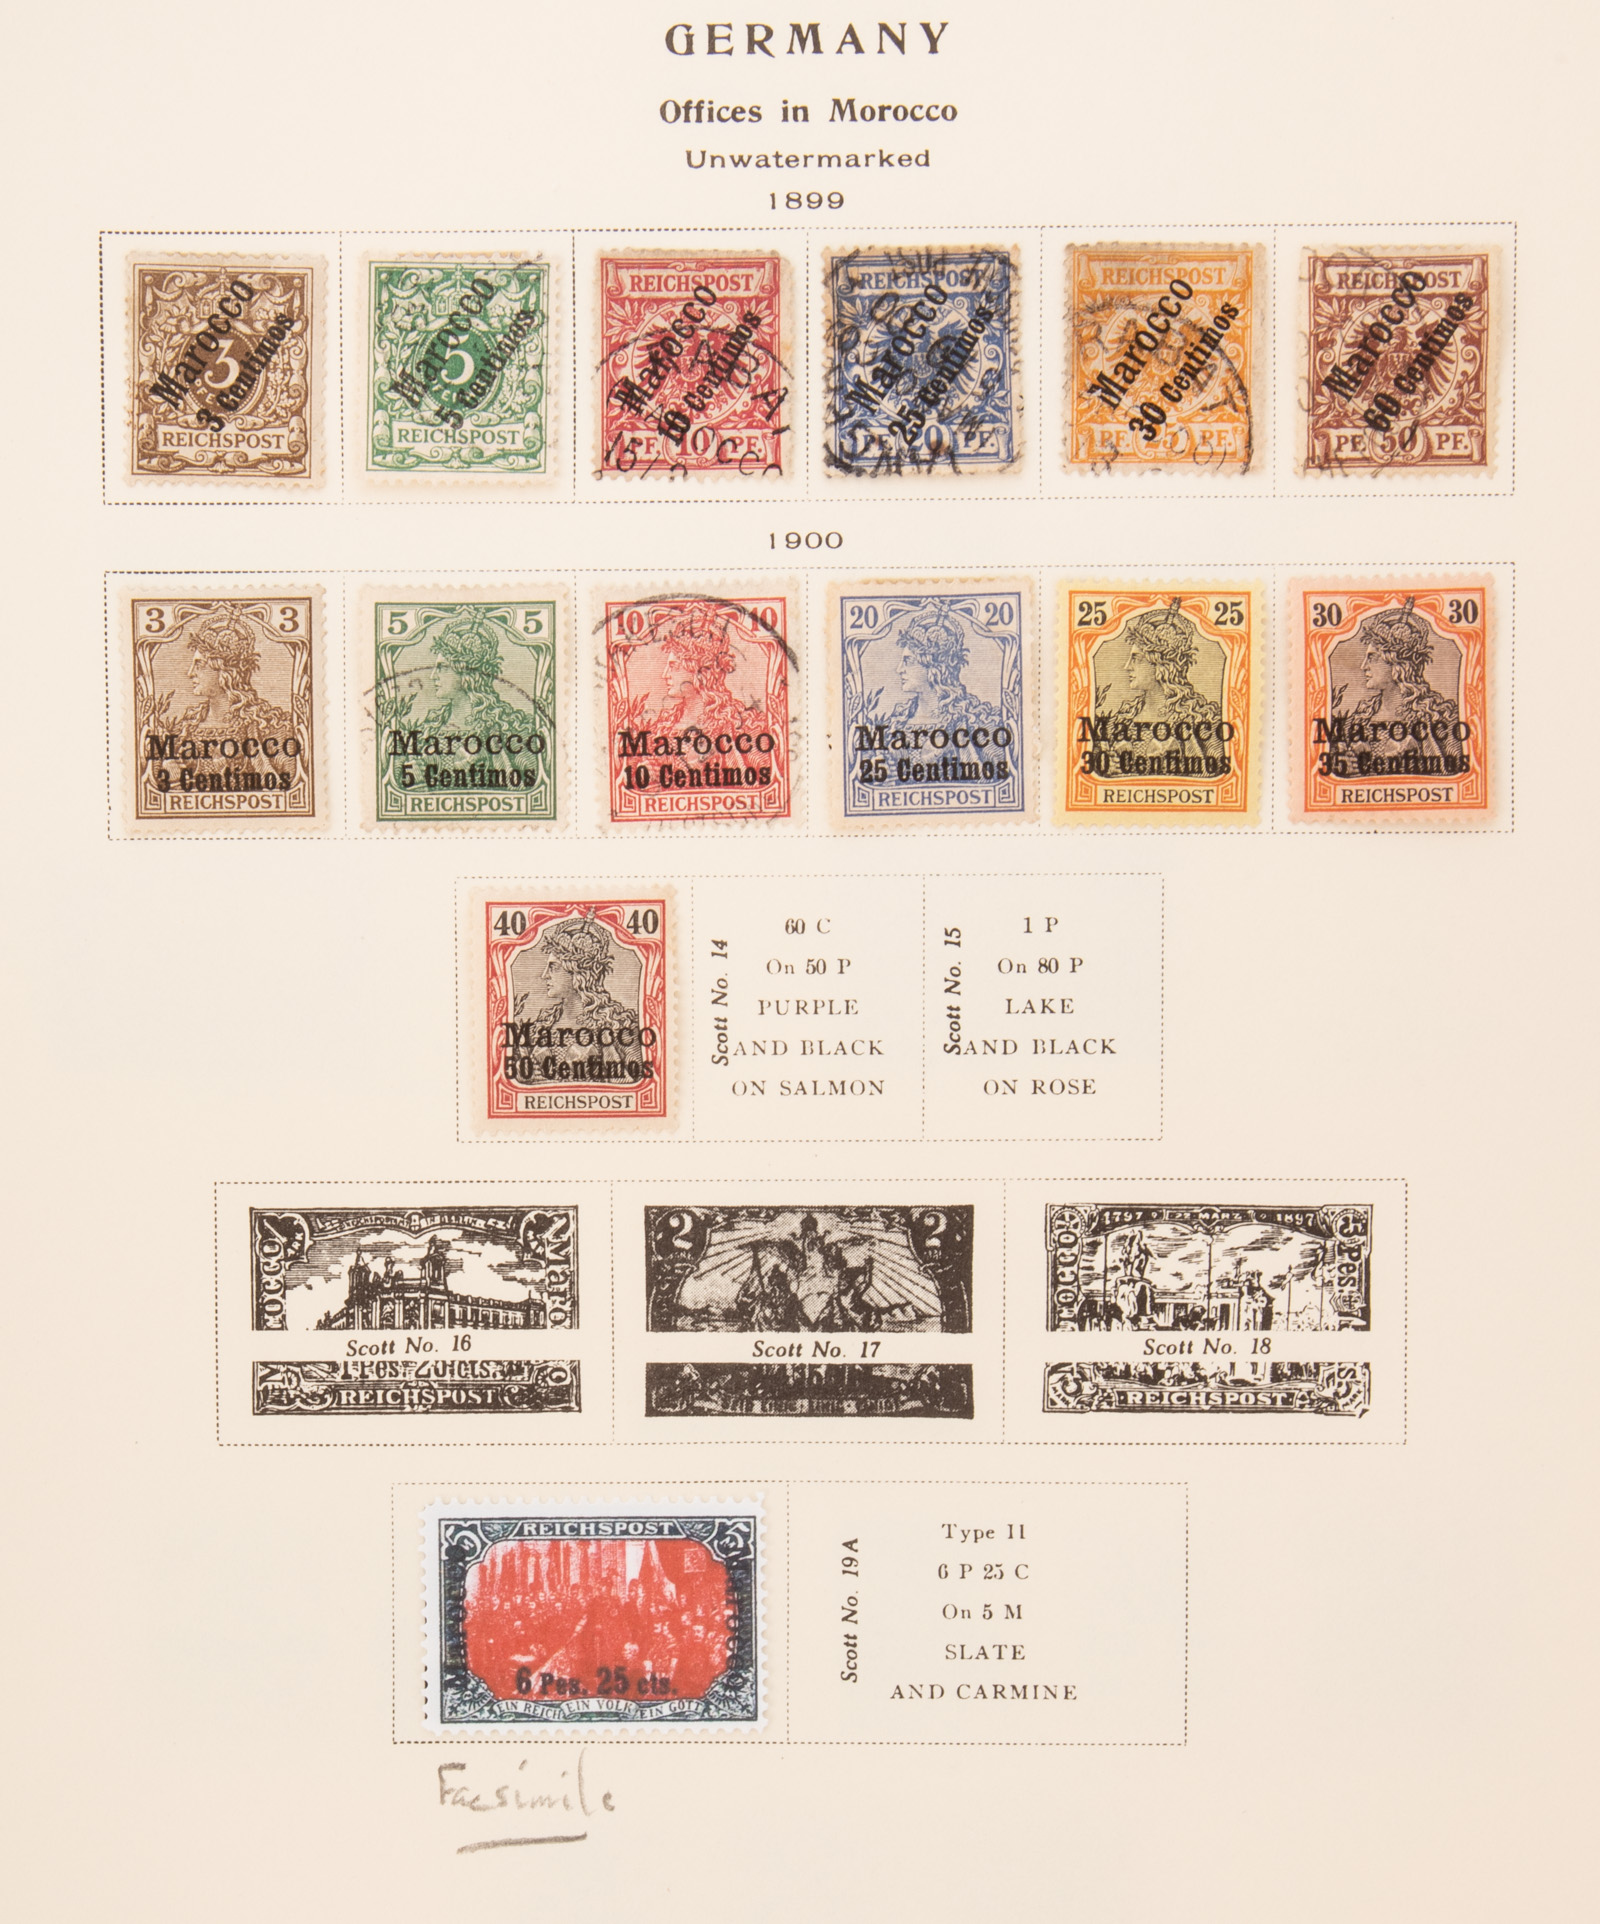 GERMAN STAMPS FOR MOROCCO TURKISH 338a22